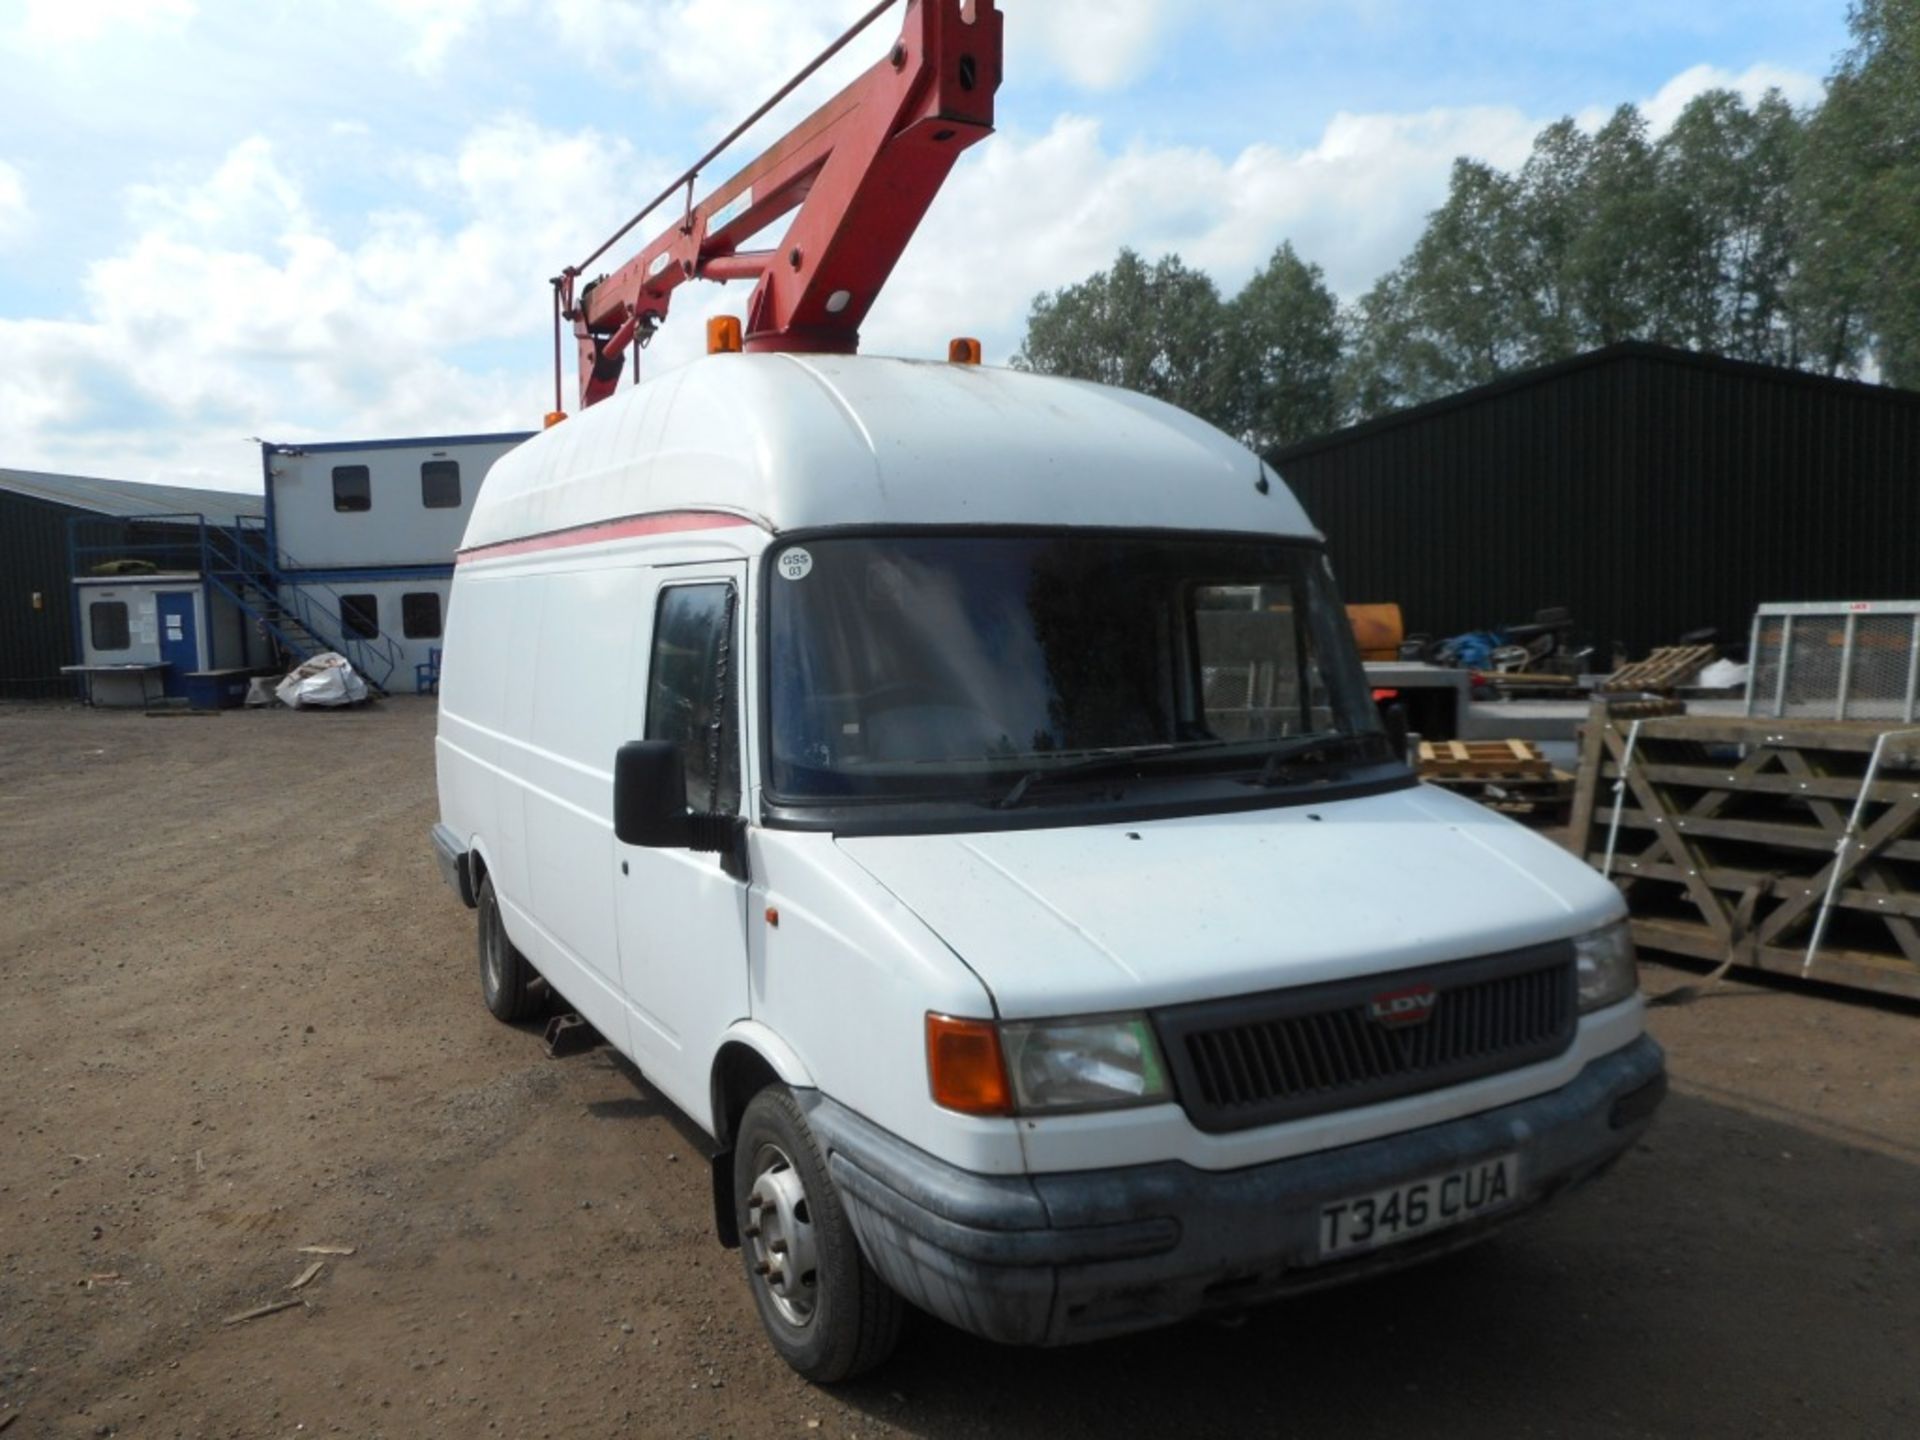 LDV high top van fitted with Bizzocchi KV120 manlift